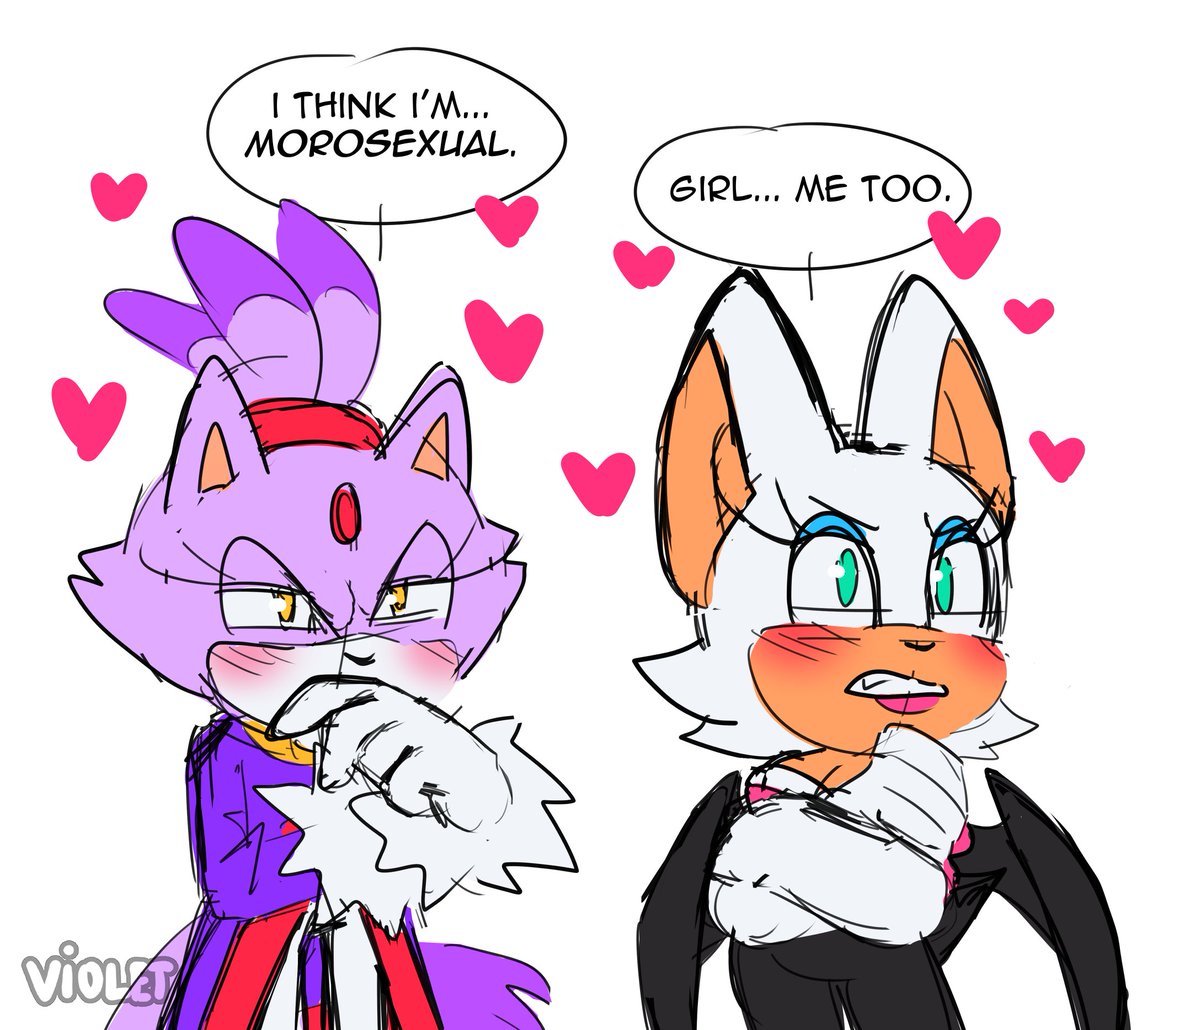 I want Silver and Knuckles to bond over being tricked 